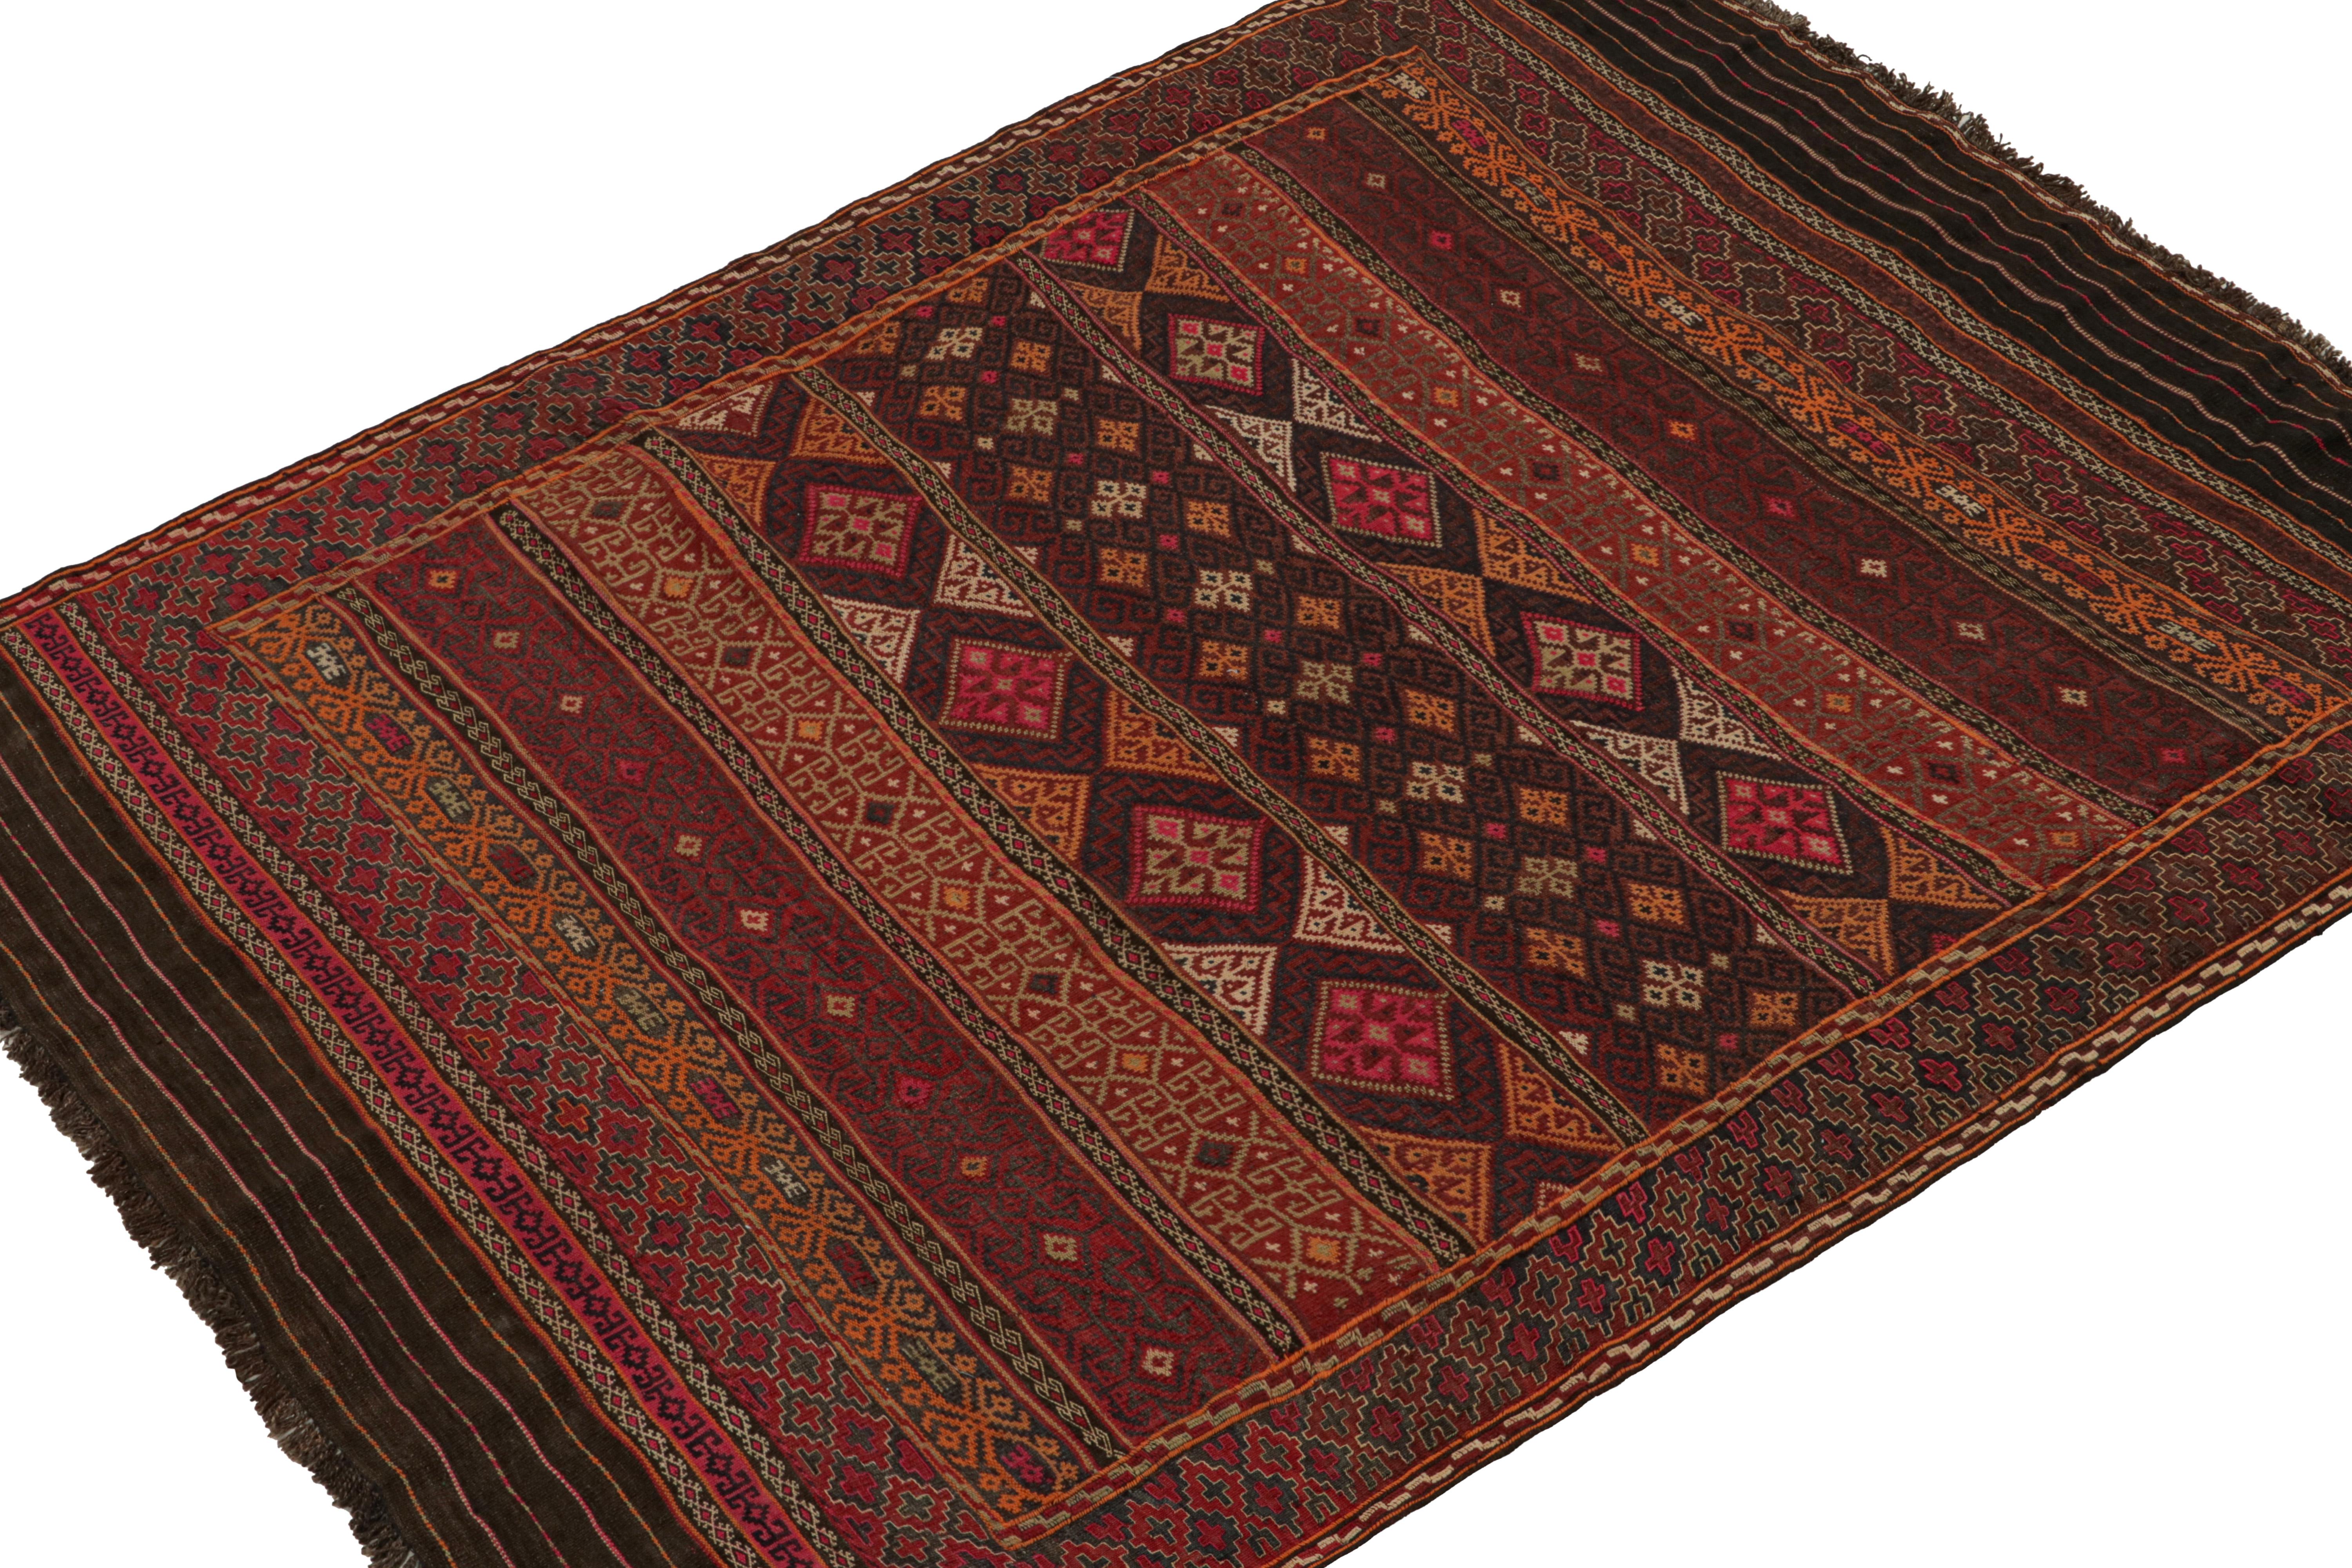 Handwoven in wool circa 1950-1960, this vintage tribal kilim rug from the Baluch tribe is the latest to join Rug & Kilim’s prestigious collection of flatweaves. 

On the Design:

Specifically believed to be coming from the Leghari clan of the Baluch